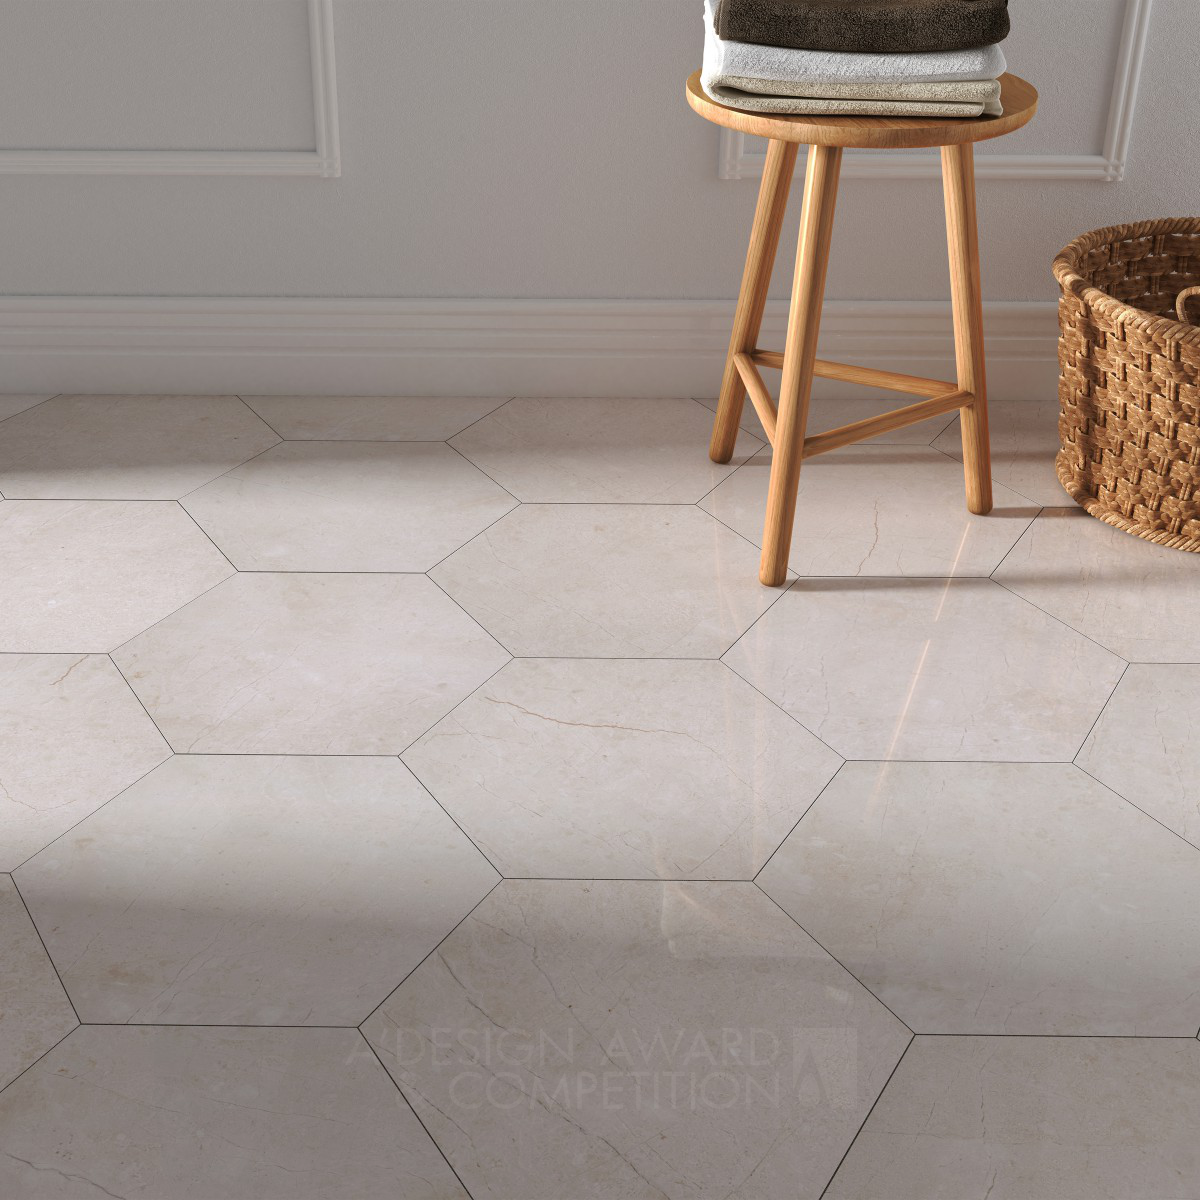 Celil Kilinc wins Bronze at the prestigious A' Building Materials and Construction Components Design Award with Marble Hexagon Tile Covering Material.